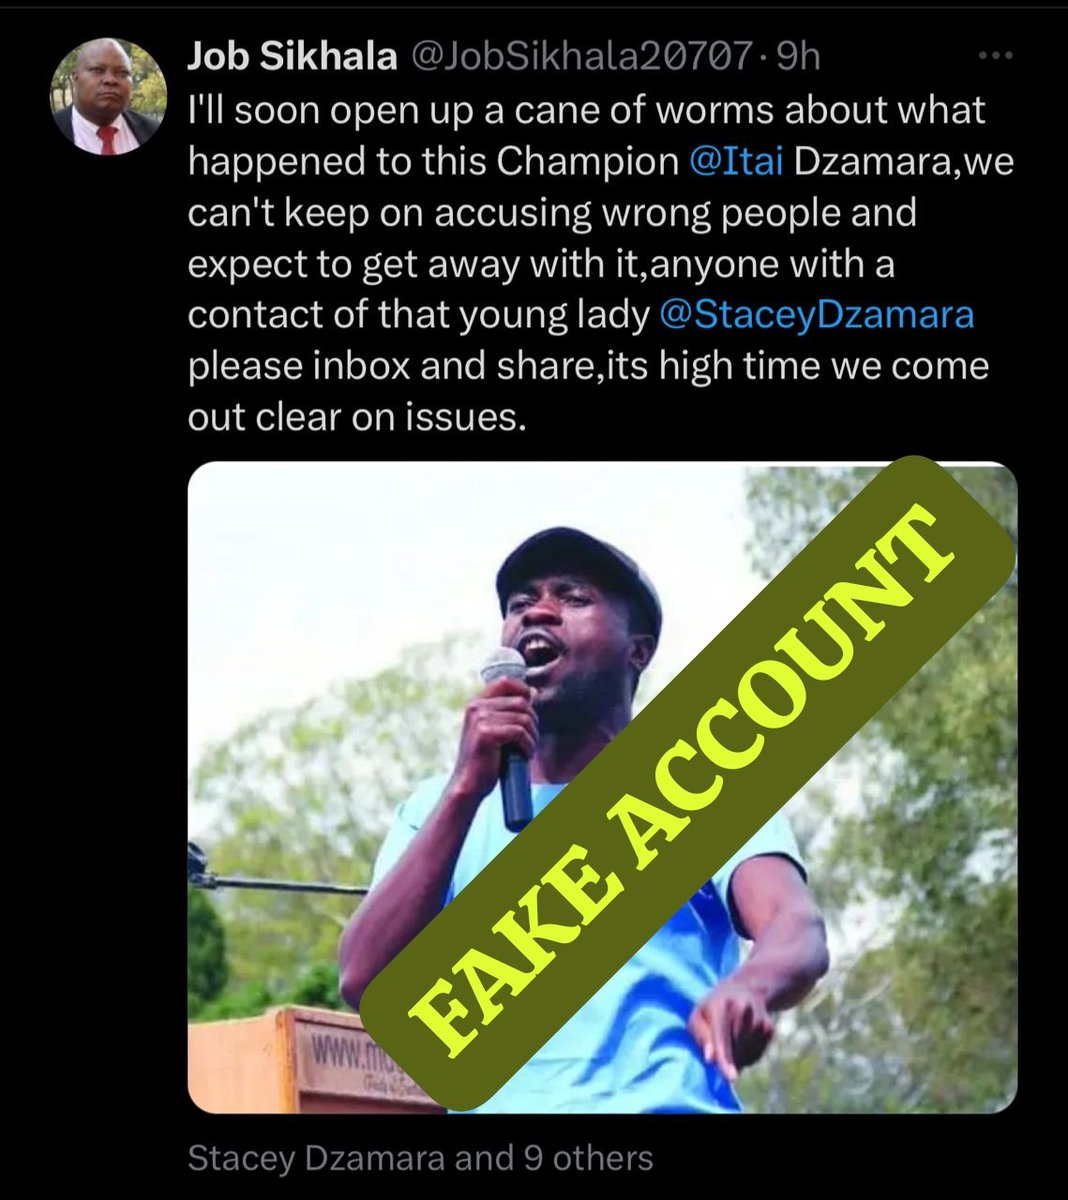 This account is fake and run by the people who might be responsible for the heinous disappearance of Itai Dzamara, and we know who they are. Evil murderers of our people.